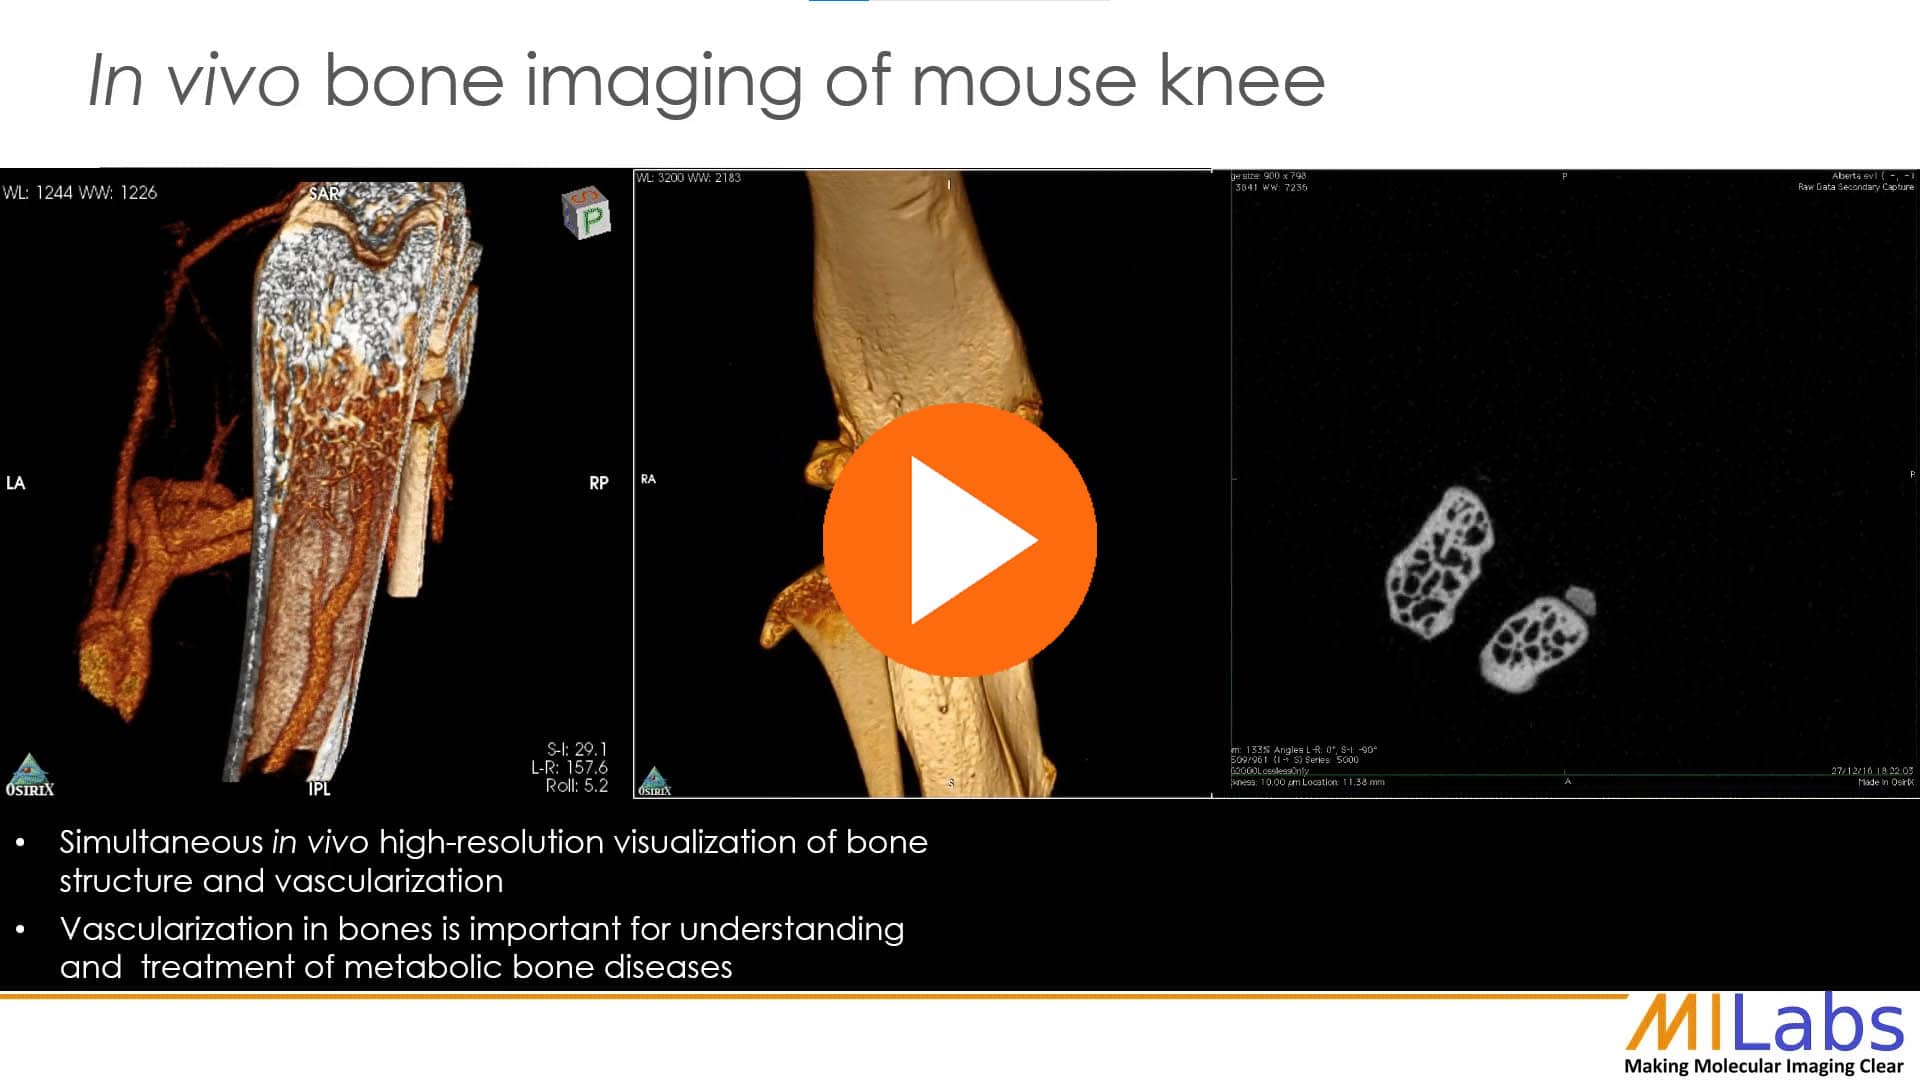 in vivo bone imaging of a mouse knee